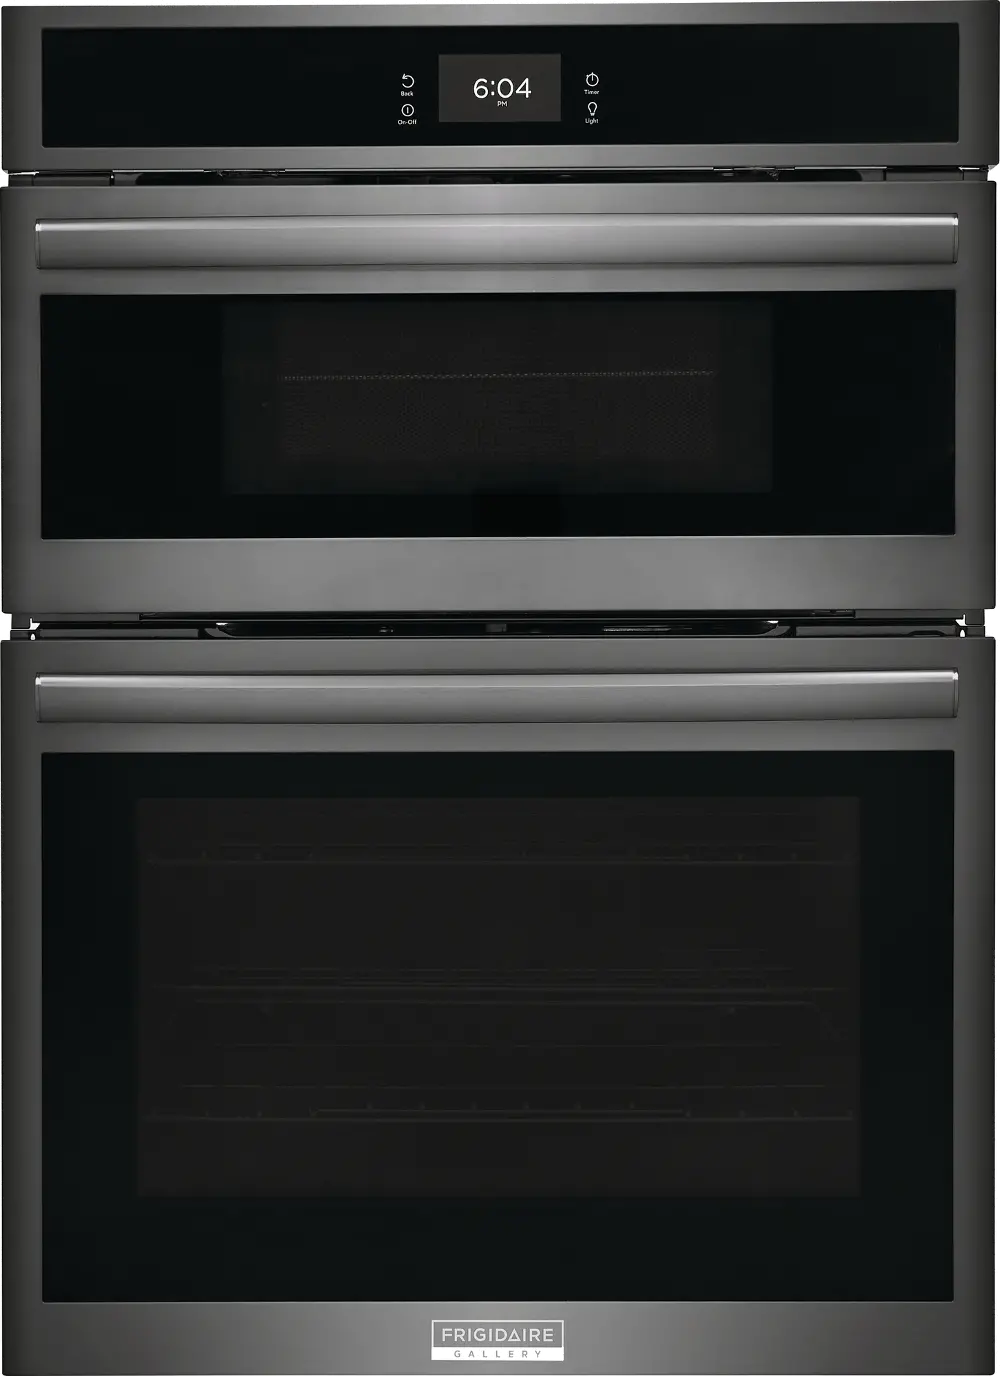 GCWM3067AD Frigidaire Gallery 7 cu ft Combination Wall Oven - Black Stainless Steel 30 Inch-1